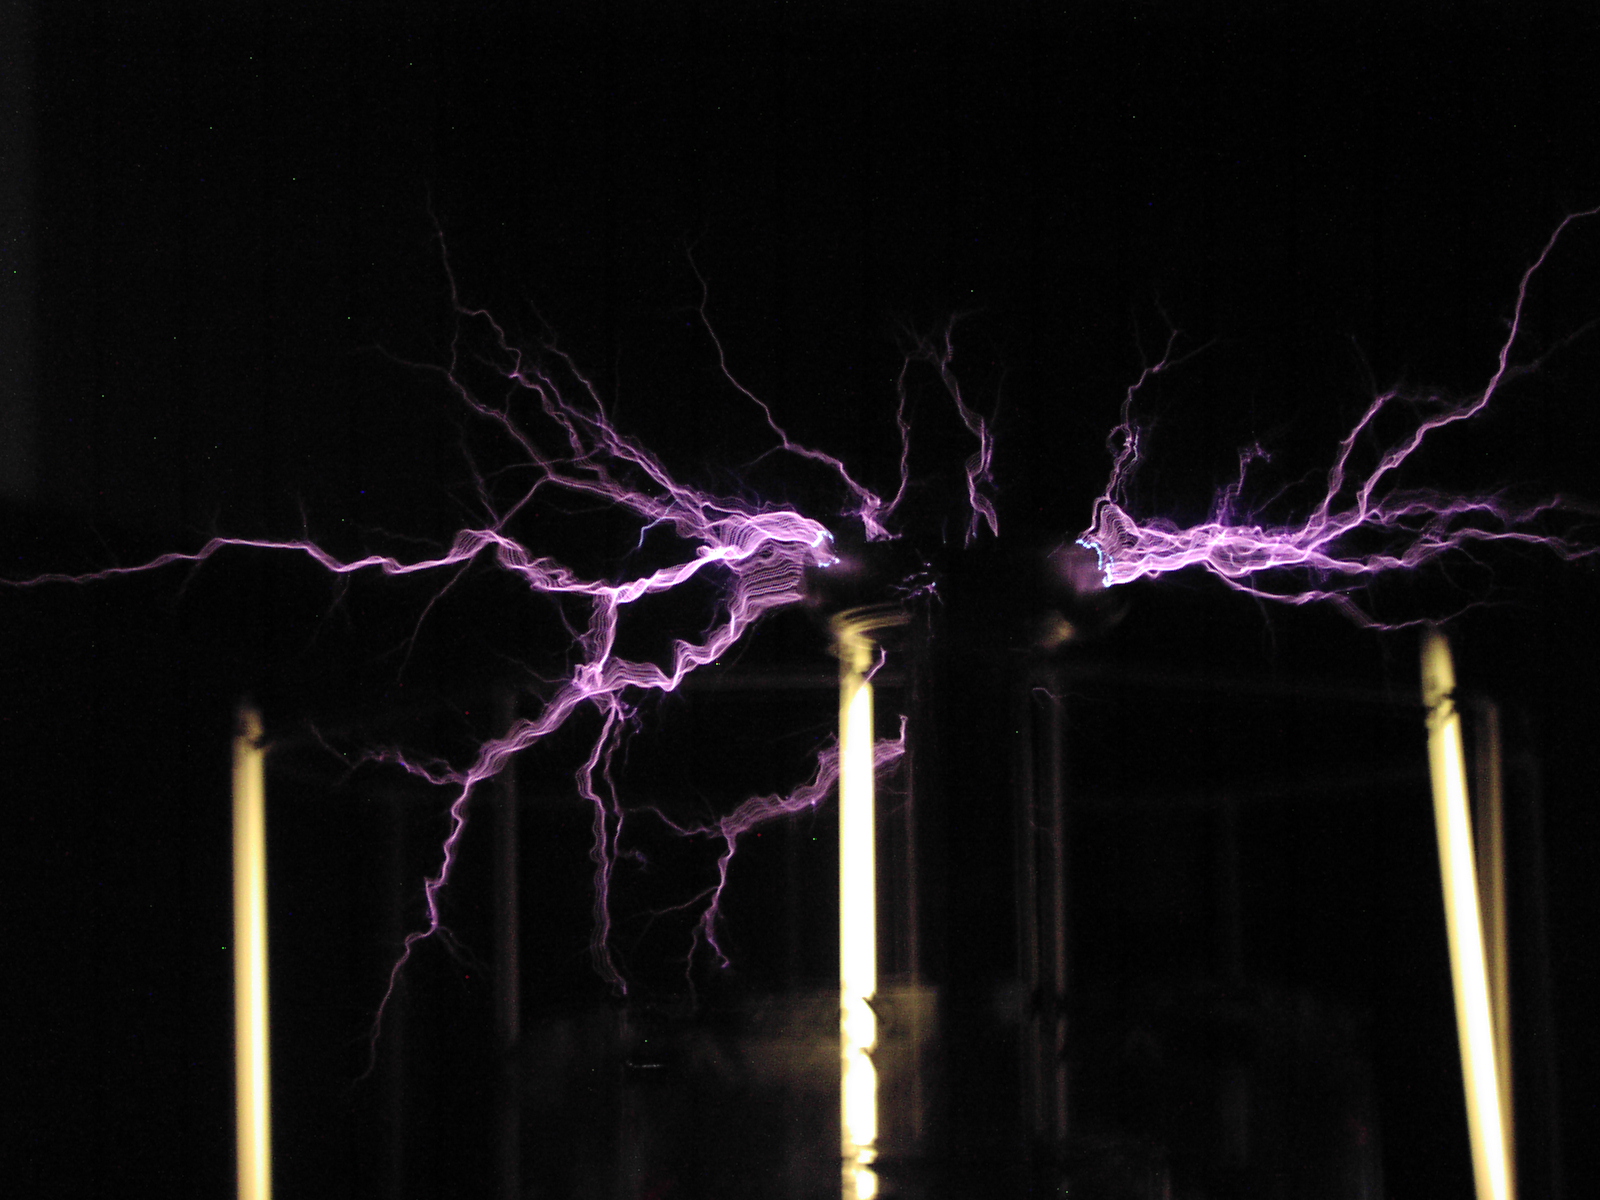 Tesla Coil Wallpaper The tesla coil in action